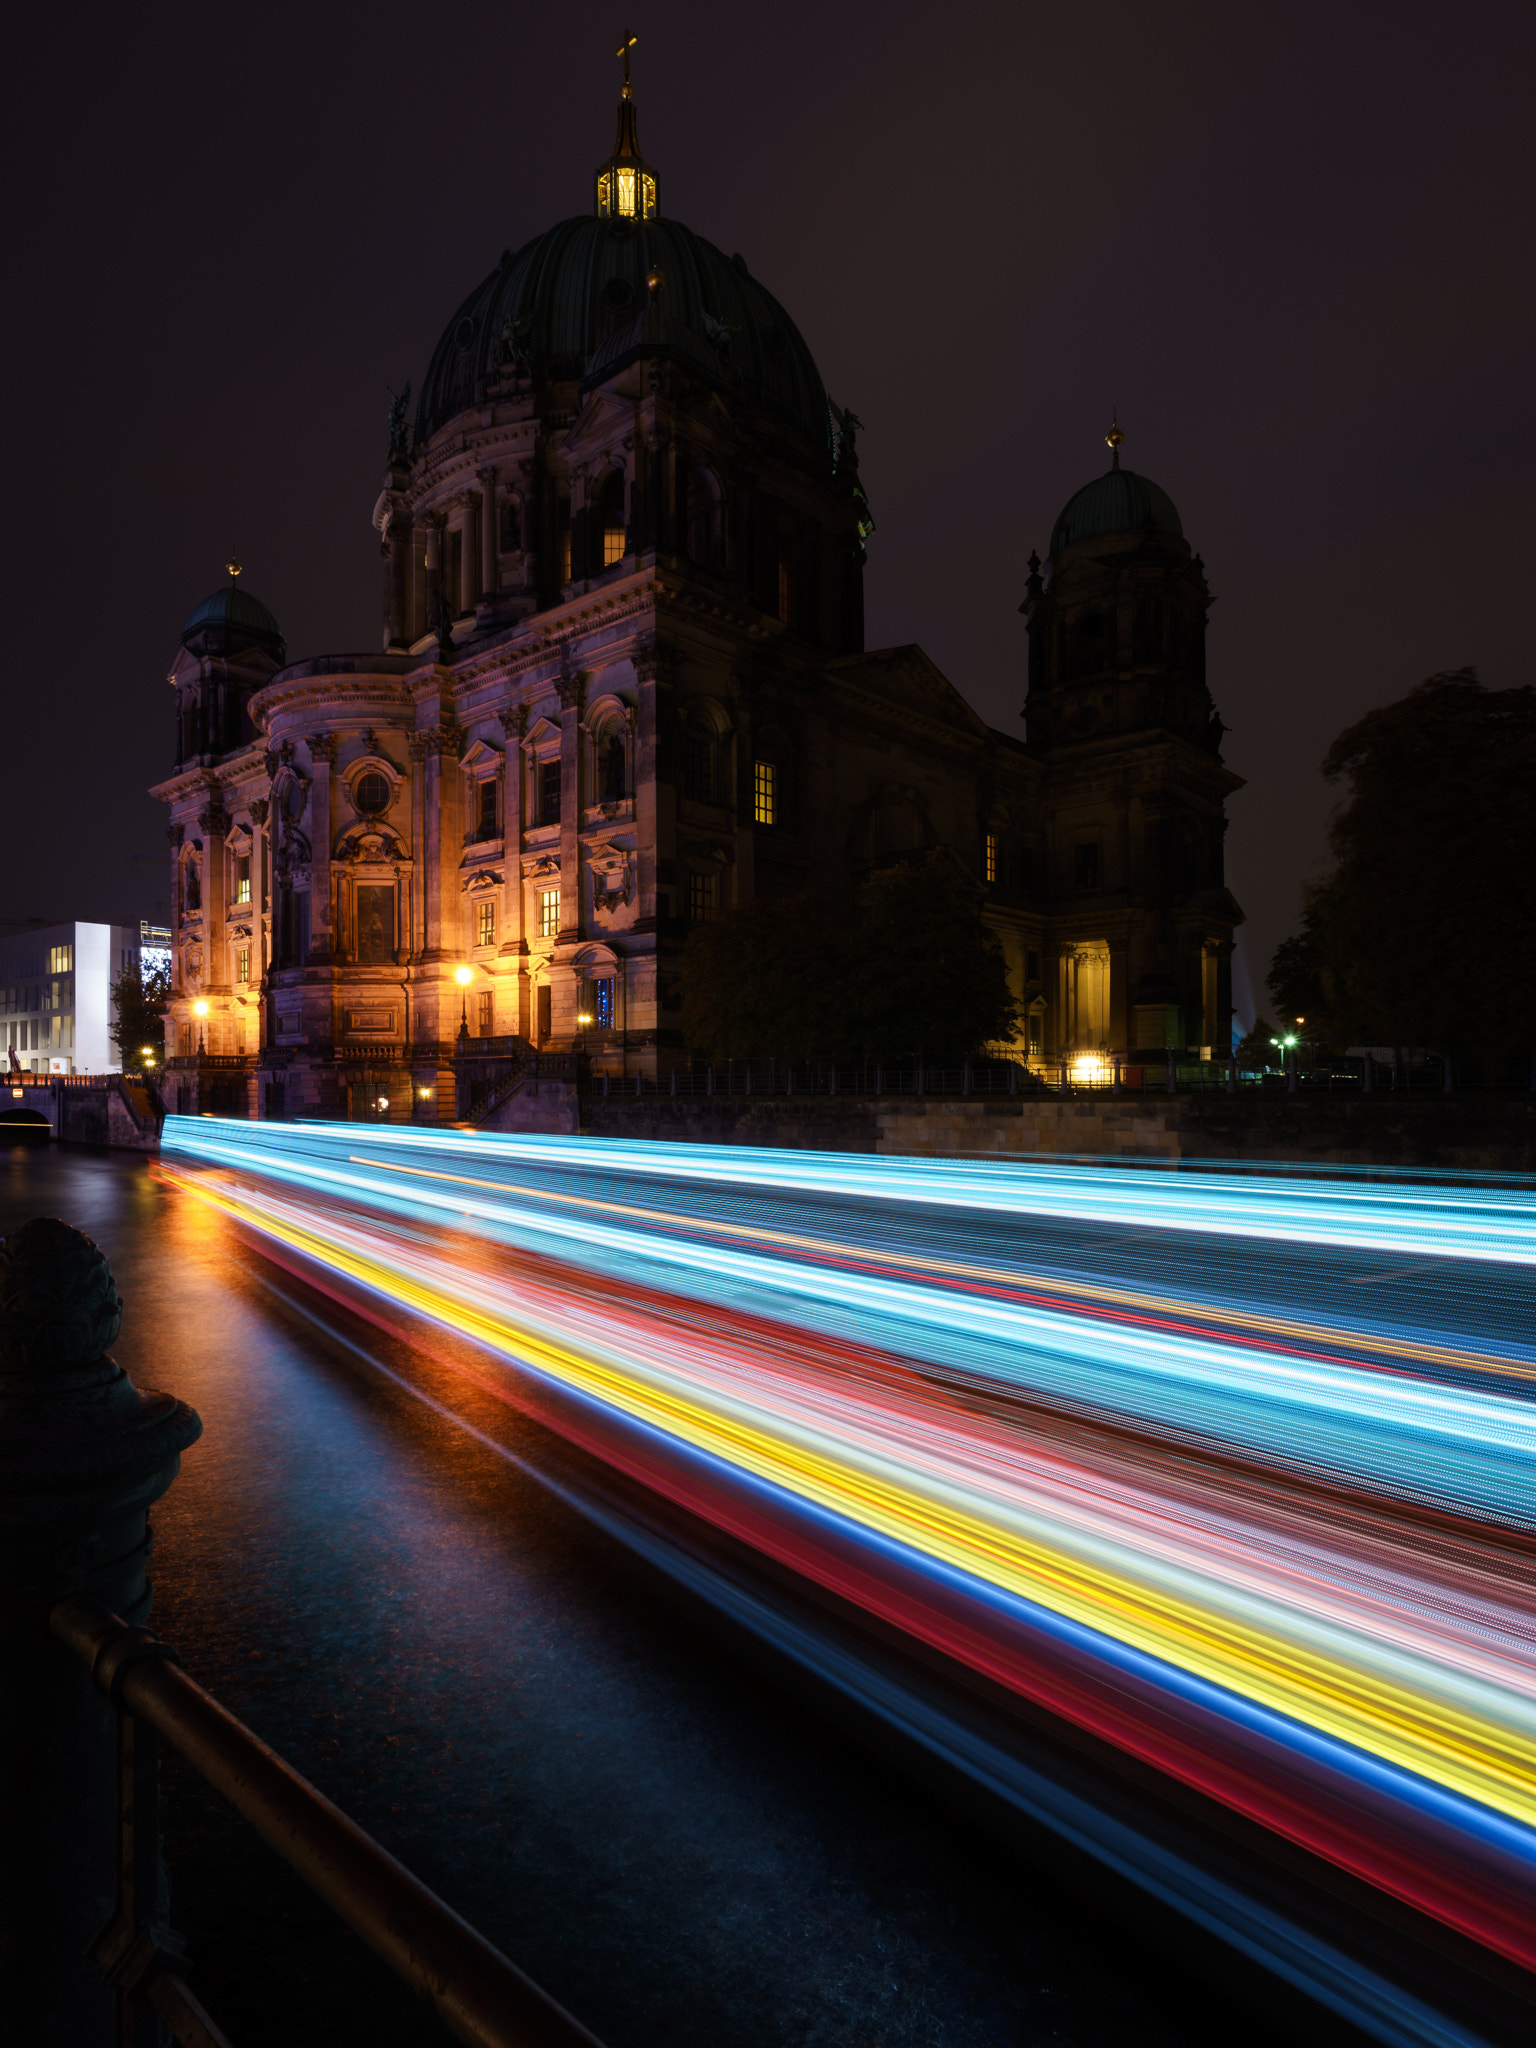 Sony a7 II + ZEISS Batis 18mm F2.8 sample photo. The berliner dom by night photography